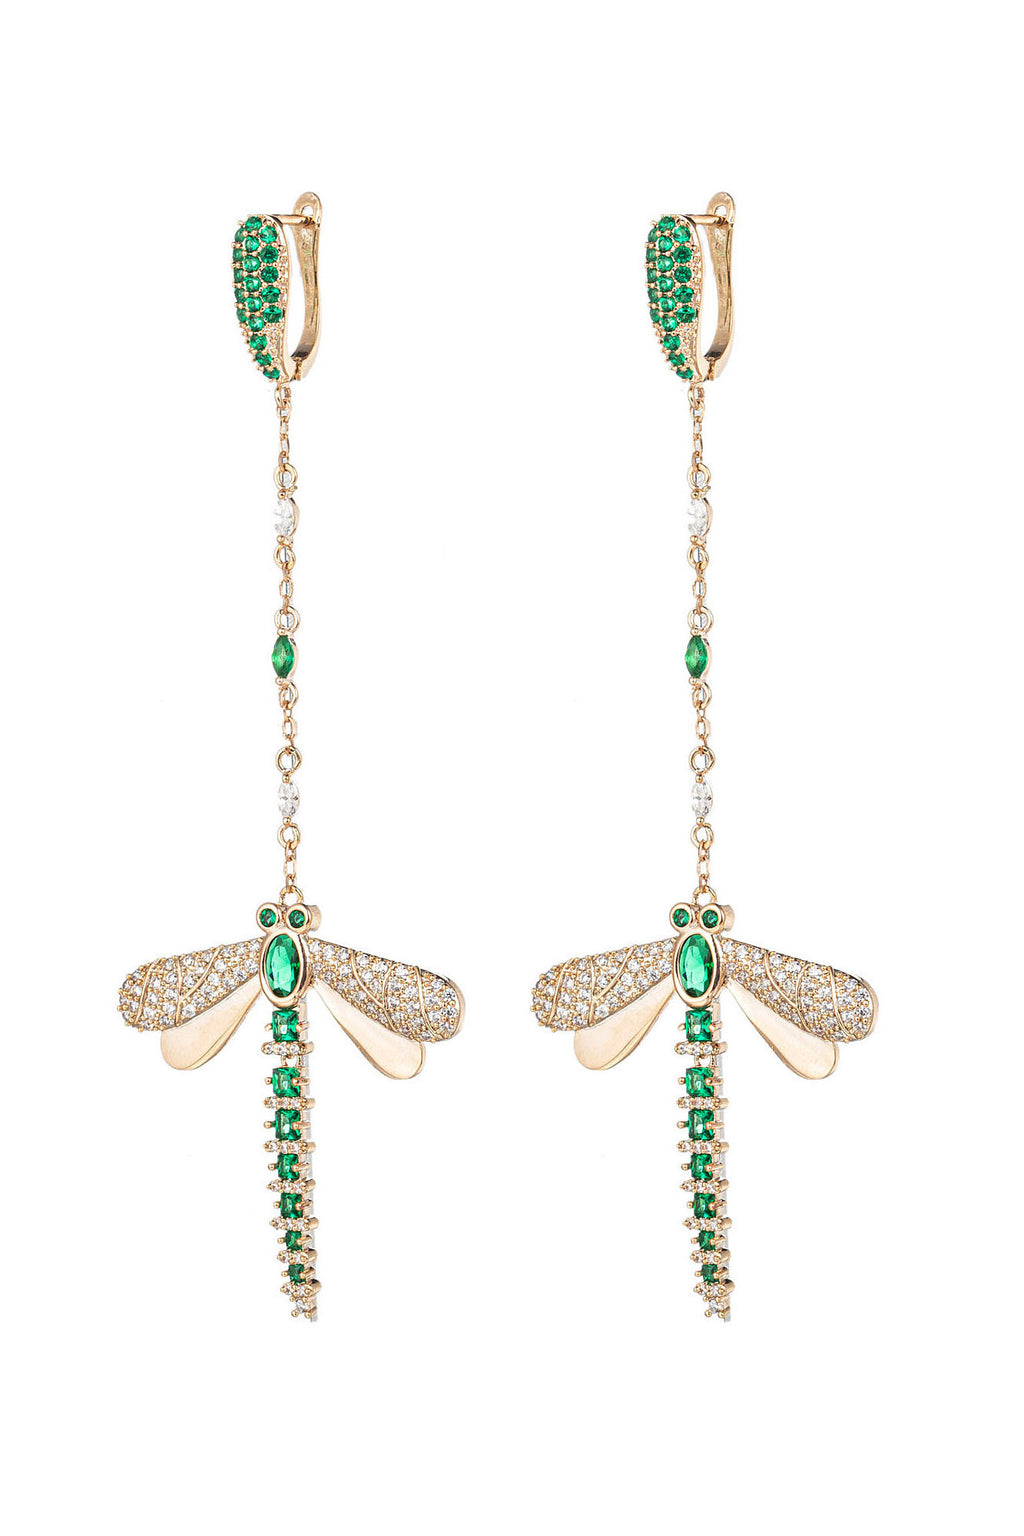 Gold and green dragonfly drop earrings studded with CZ crystals.